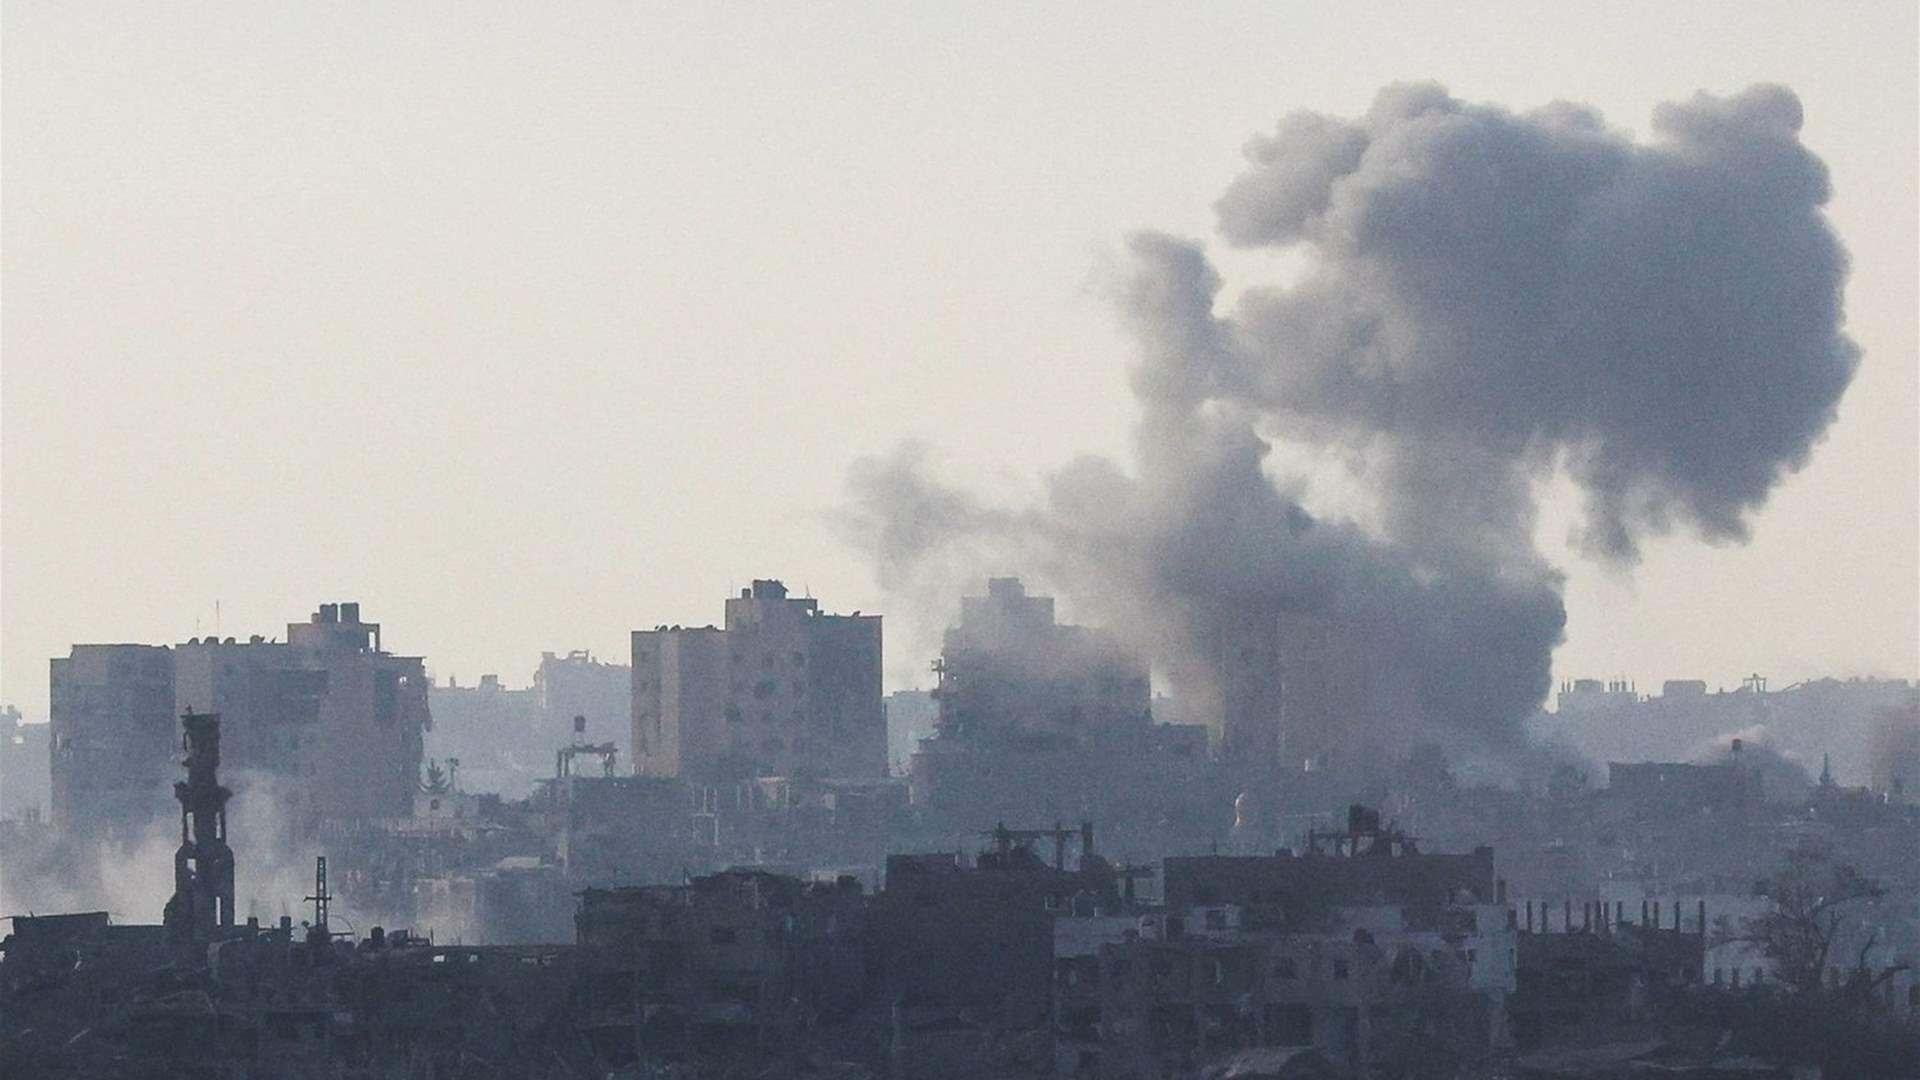 Israeli strikes kill at least 50 Palestinians in Khan Younis within 24 hours